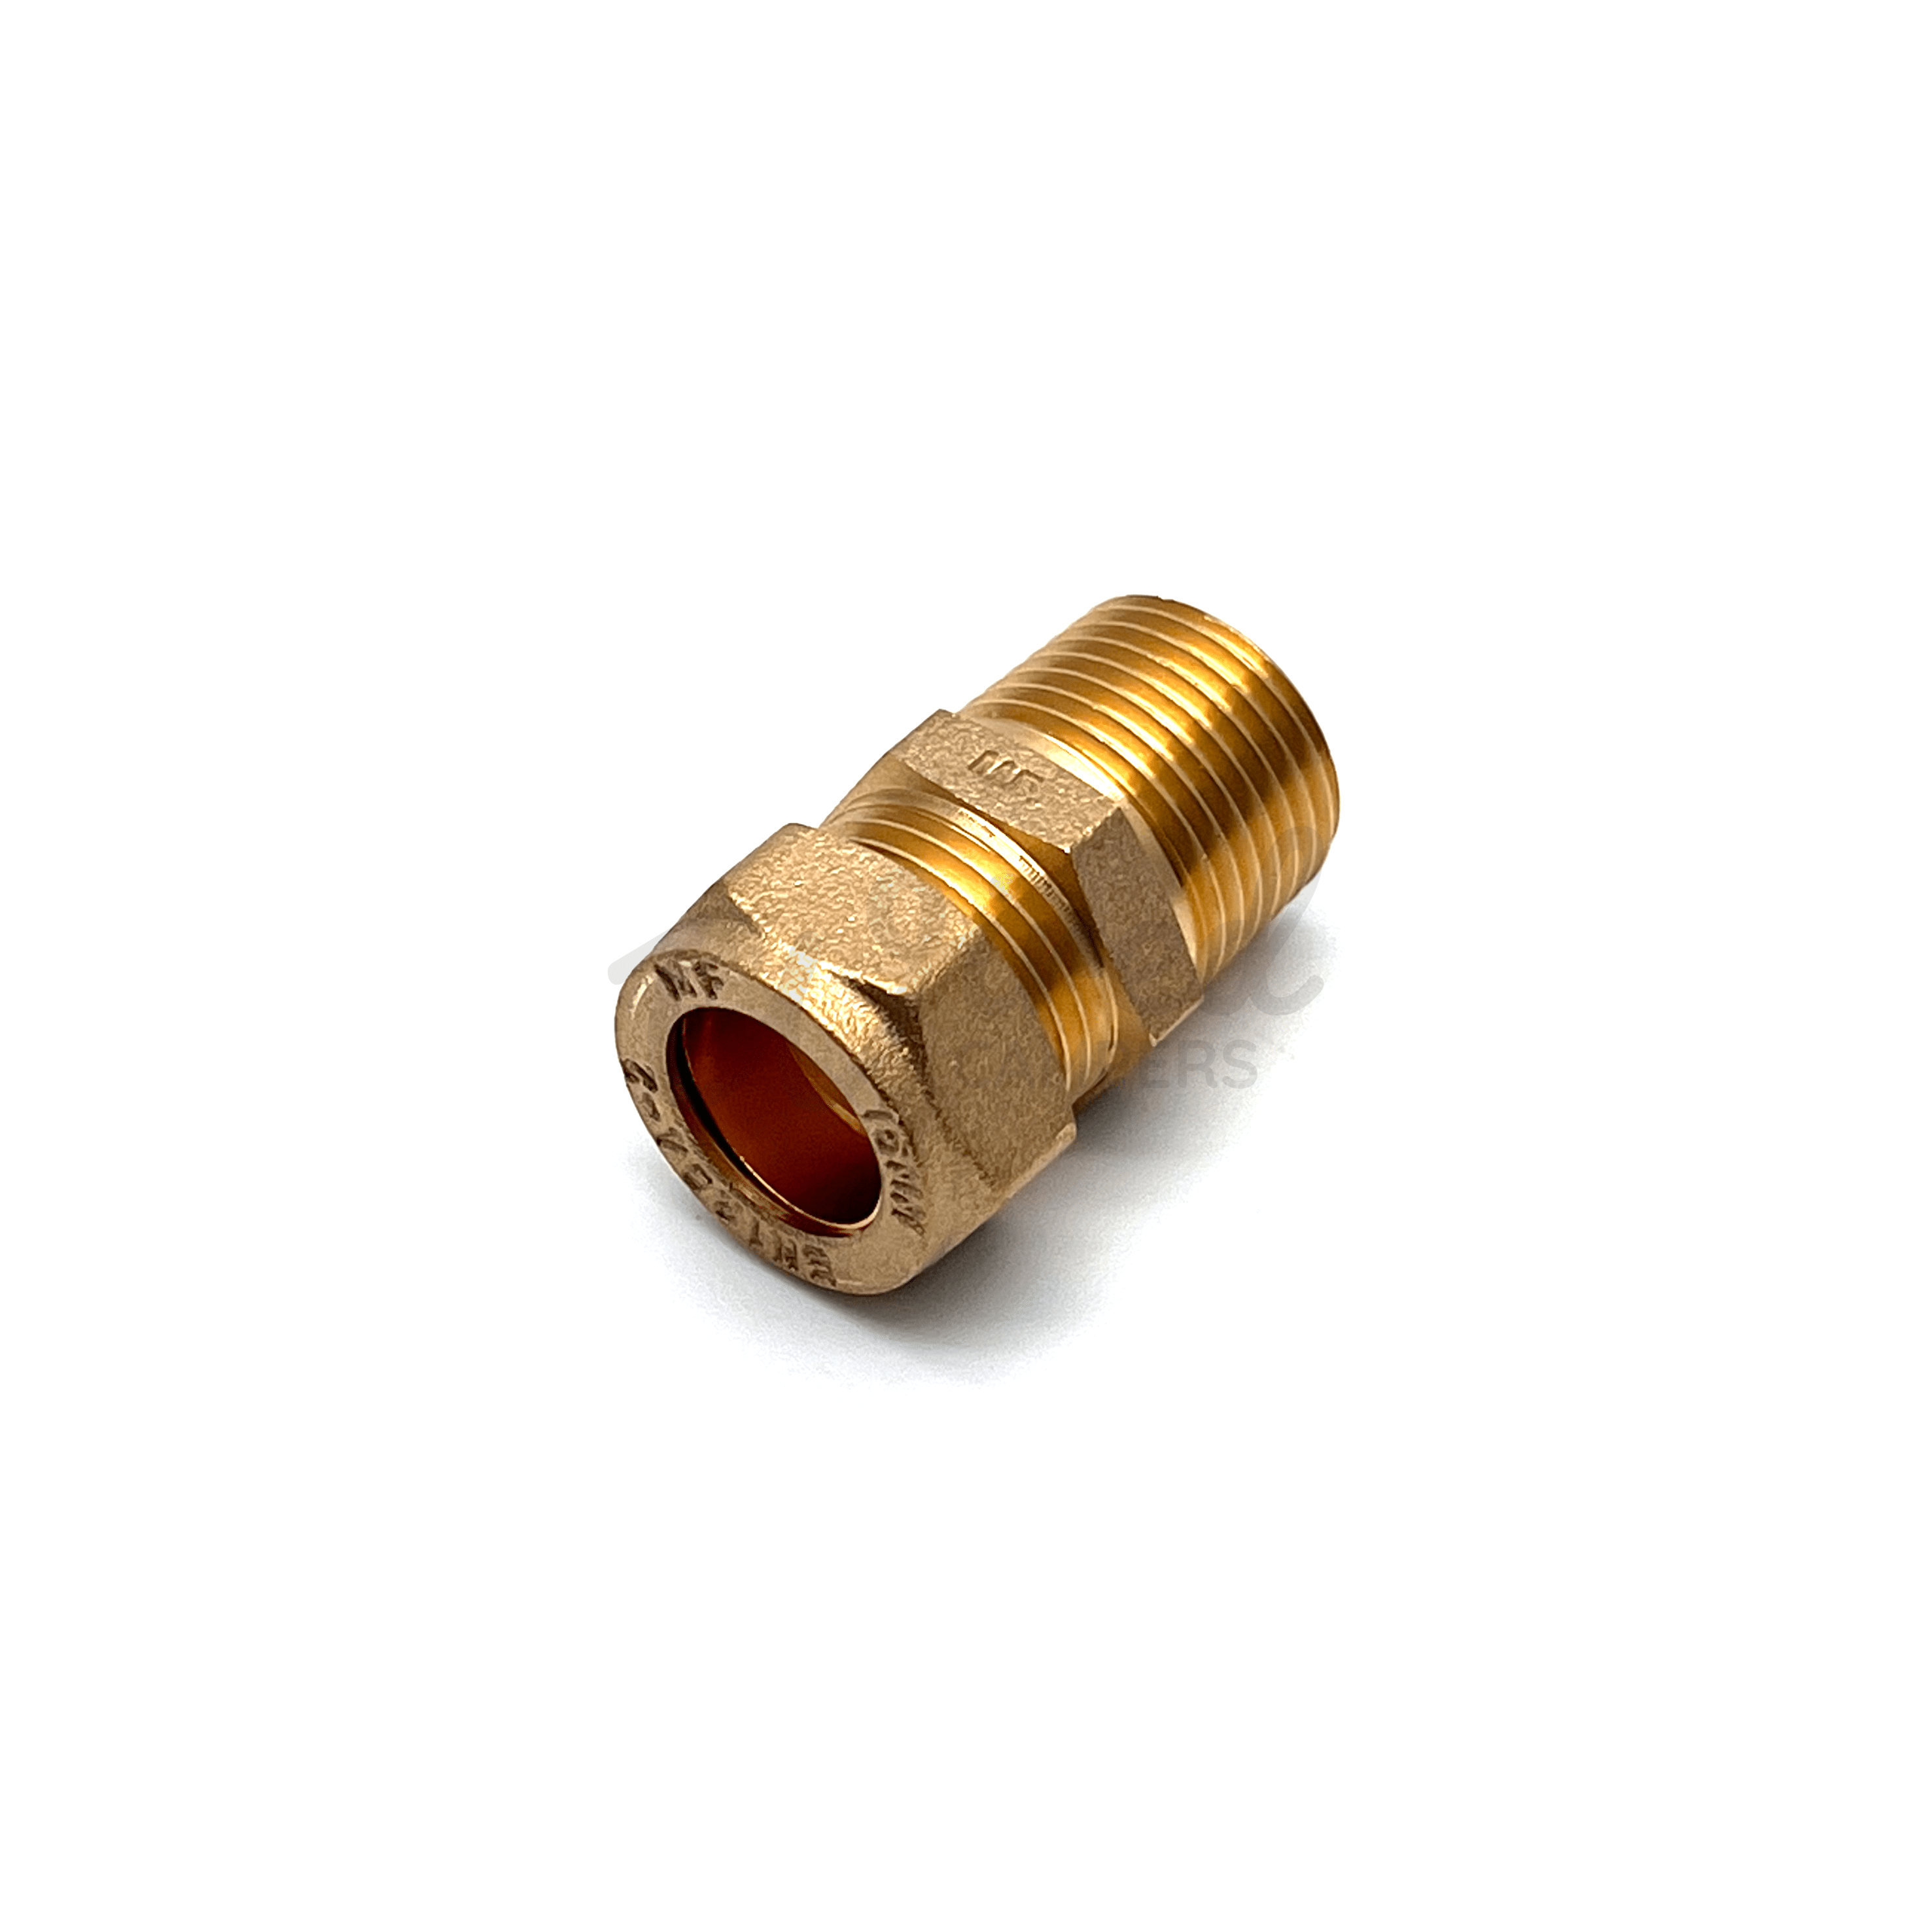 Wired Campers Limited 15MM X 1/2" Male BSP Compression Adapter Fitting